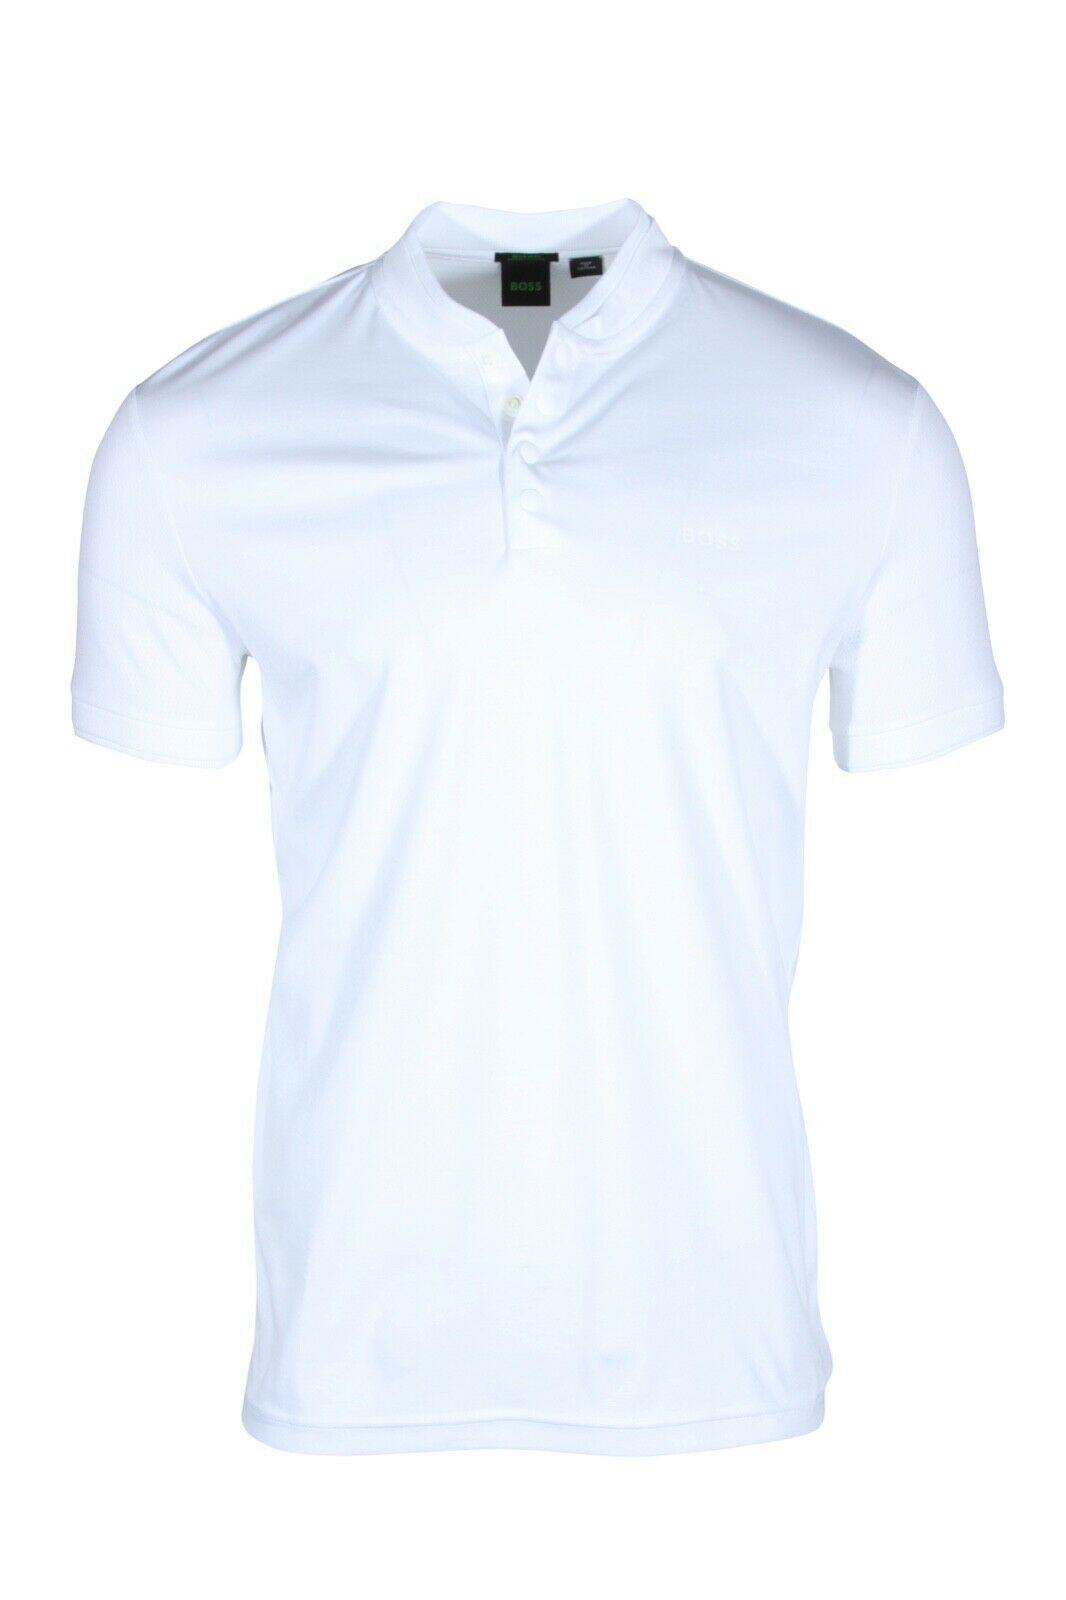 HUGO BOSS Paddy 7 Men’s Shirt with Press Stud Placket in White 50473838 100